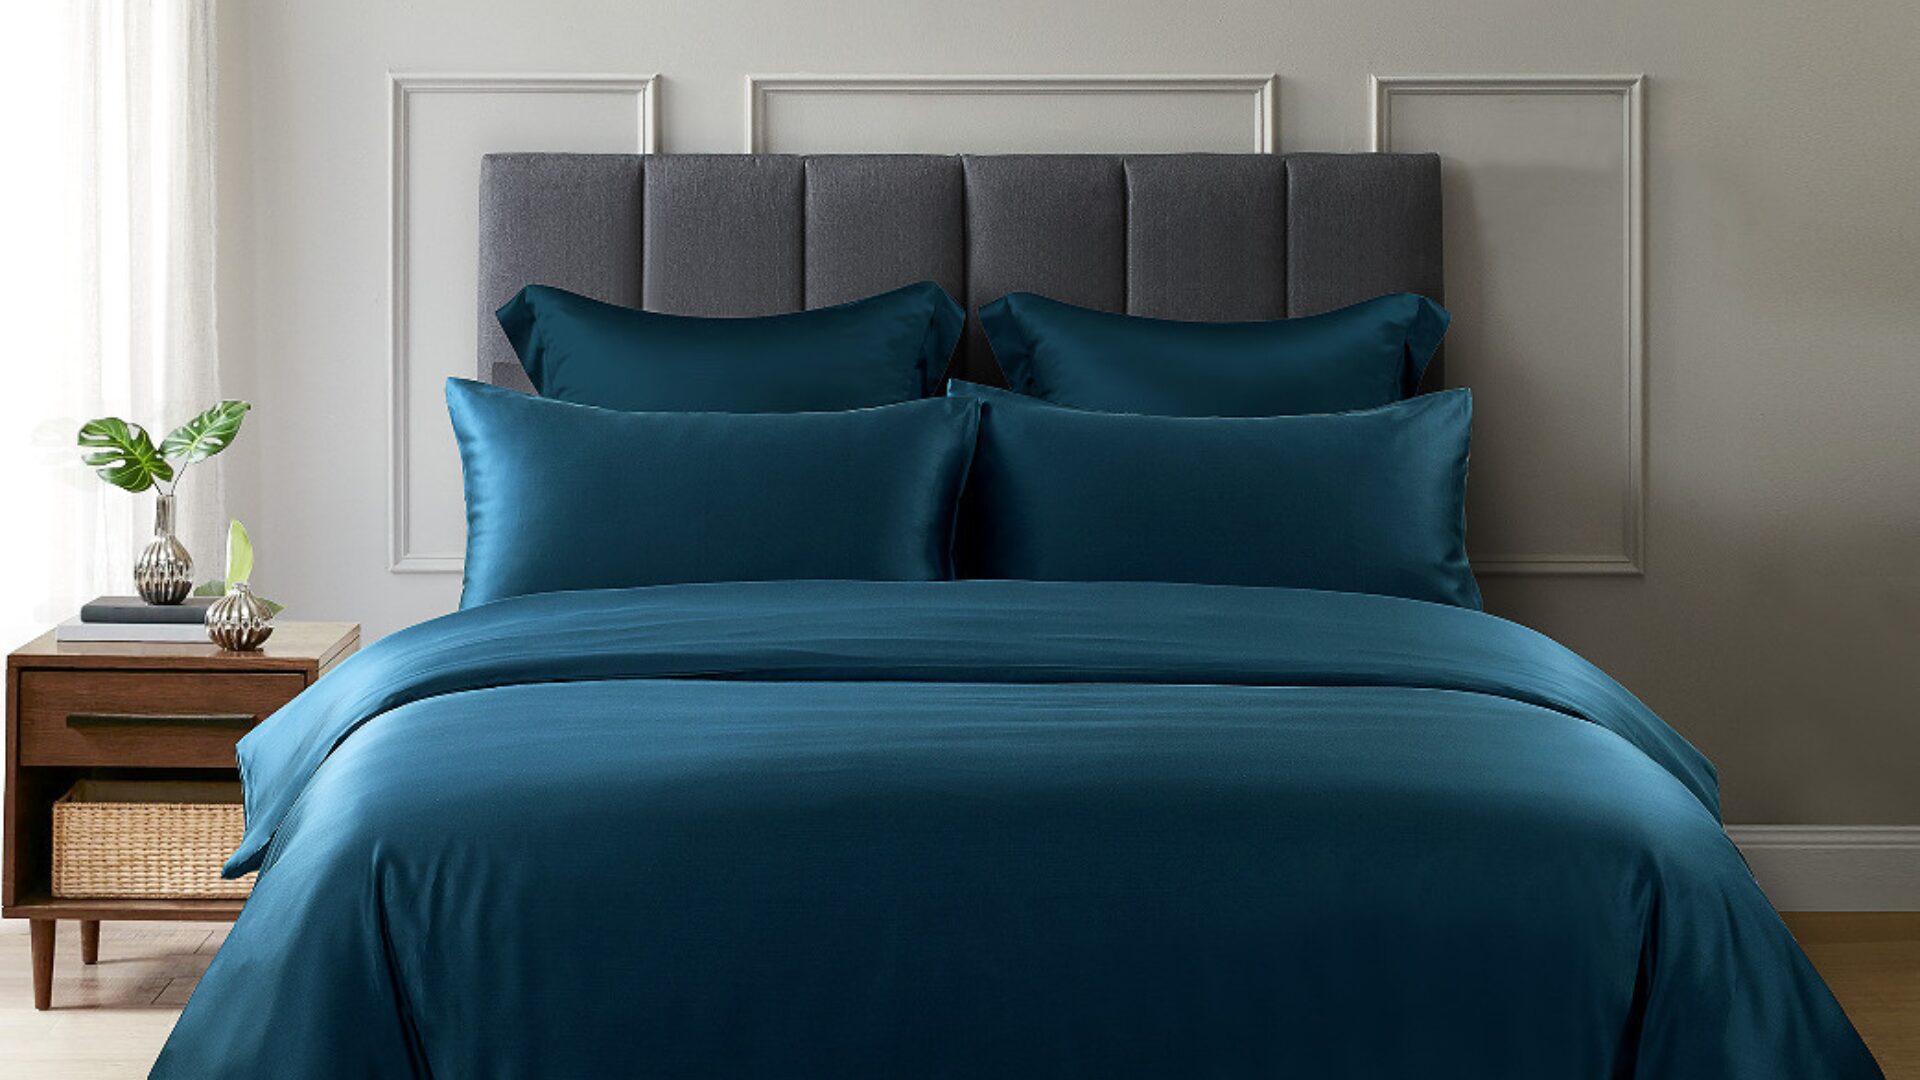 Top 10 Tips to Choose the Ideal Bed Sheets